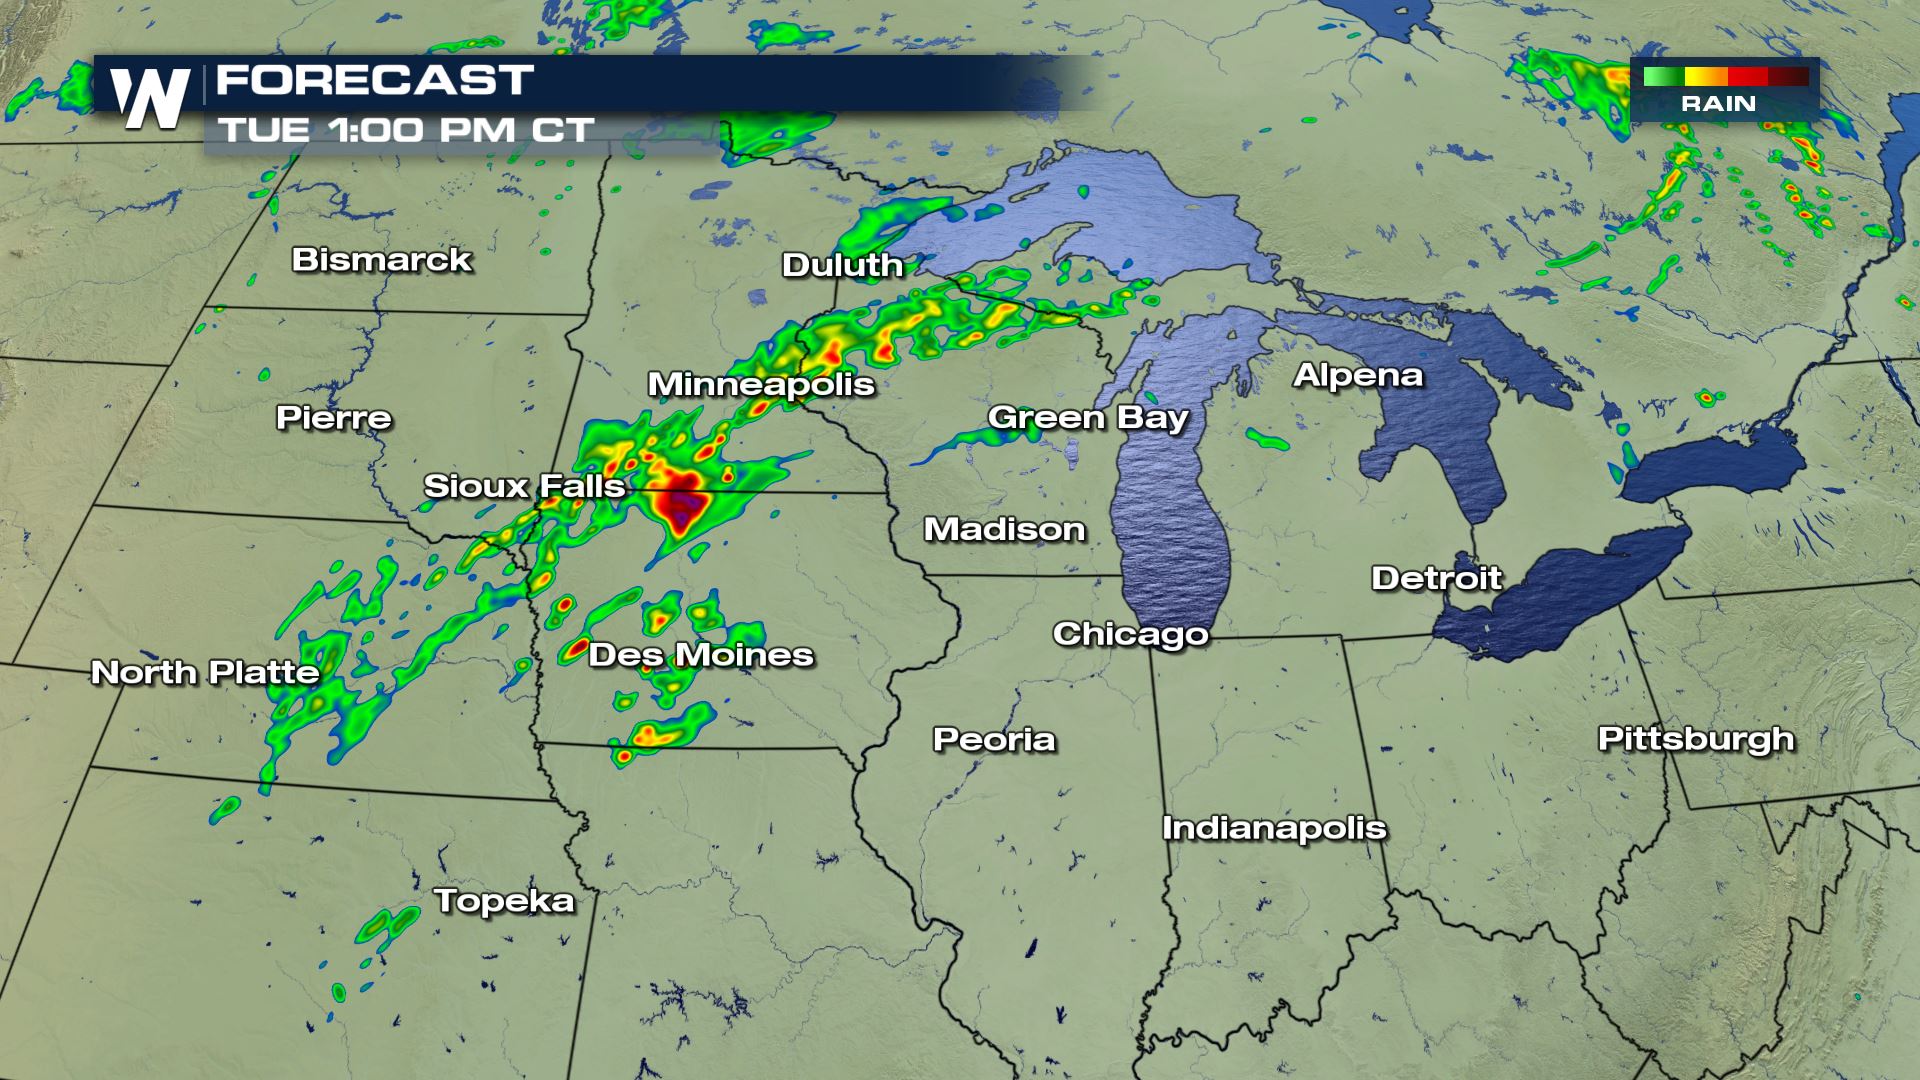 Severe Storms and Heavy Rain from Missouri to Michigan Tuesday